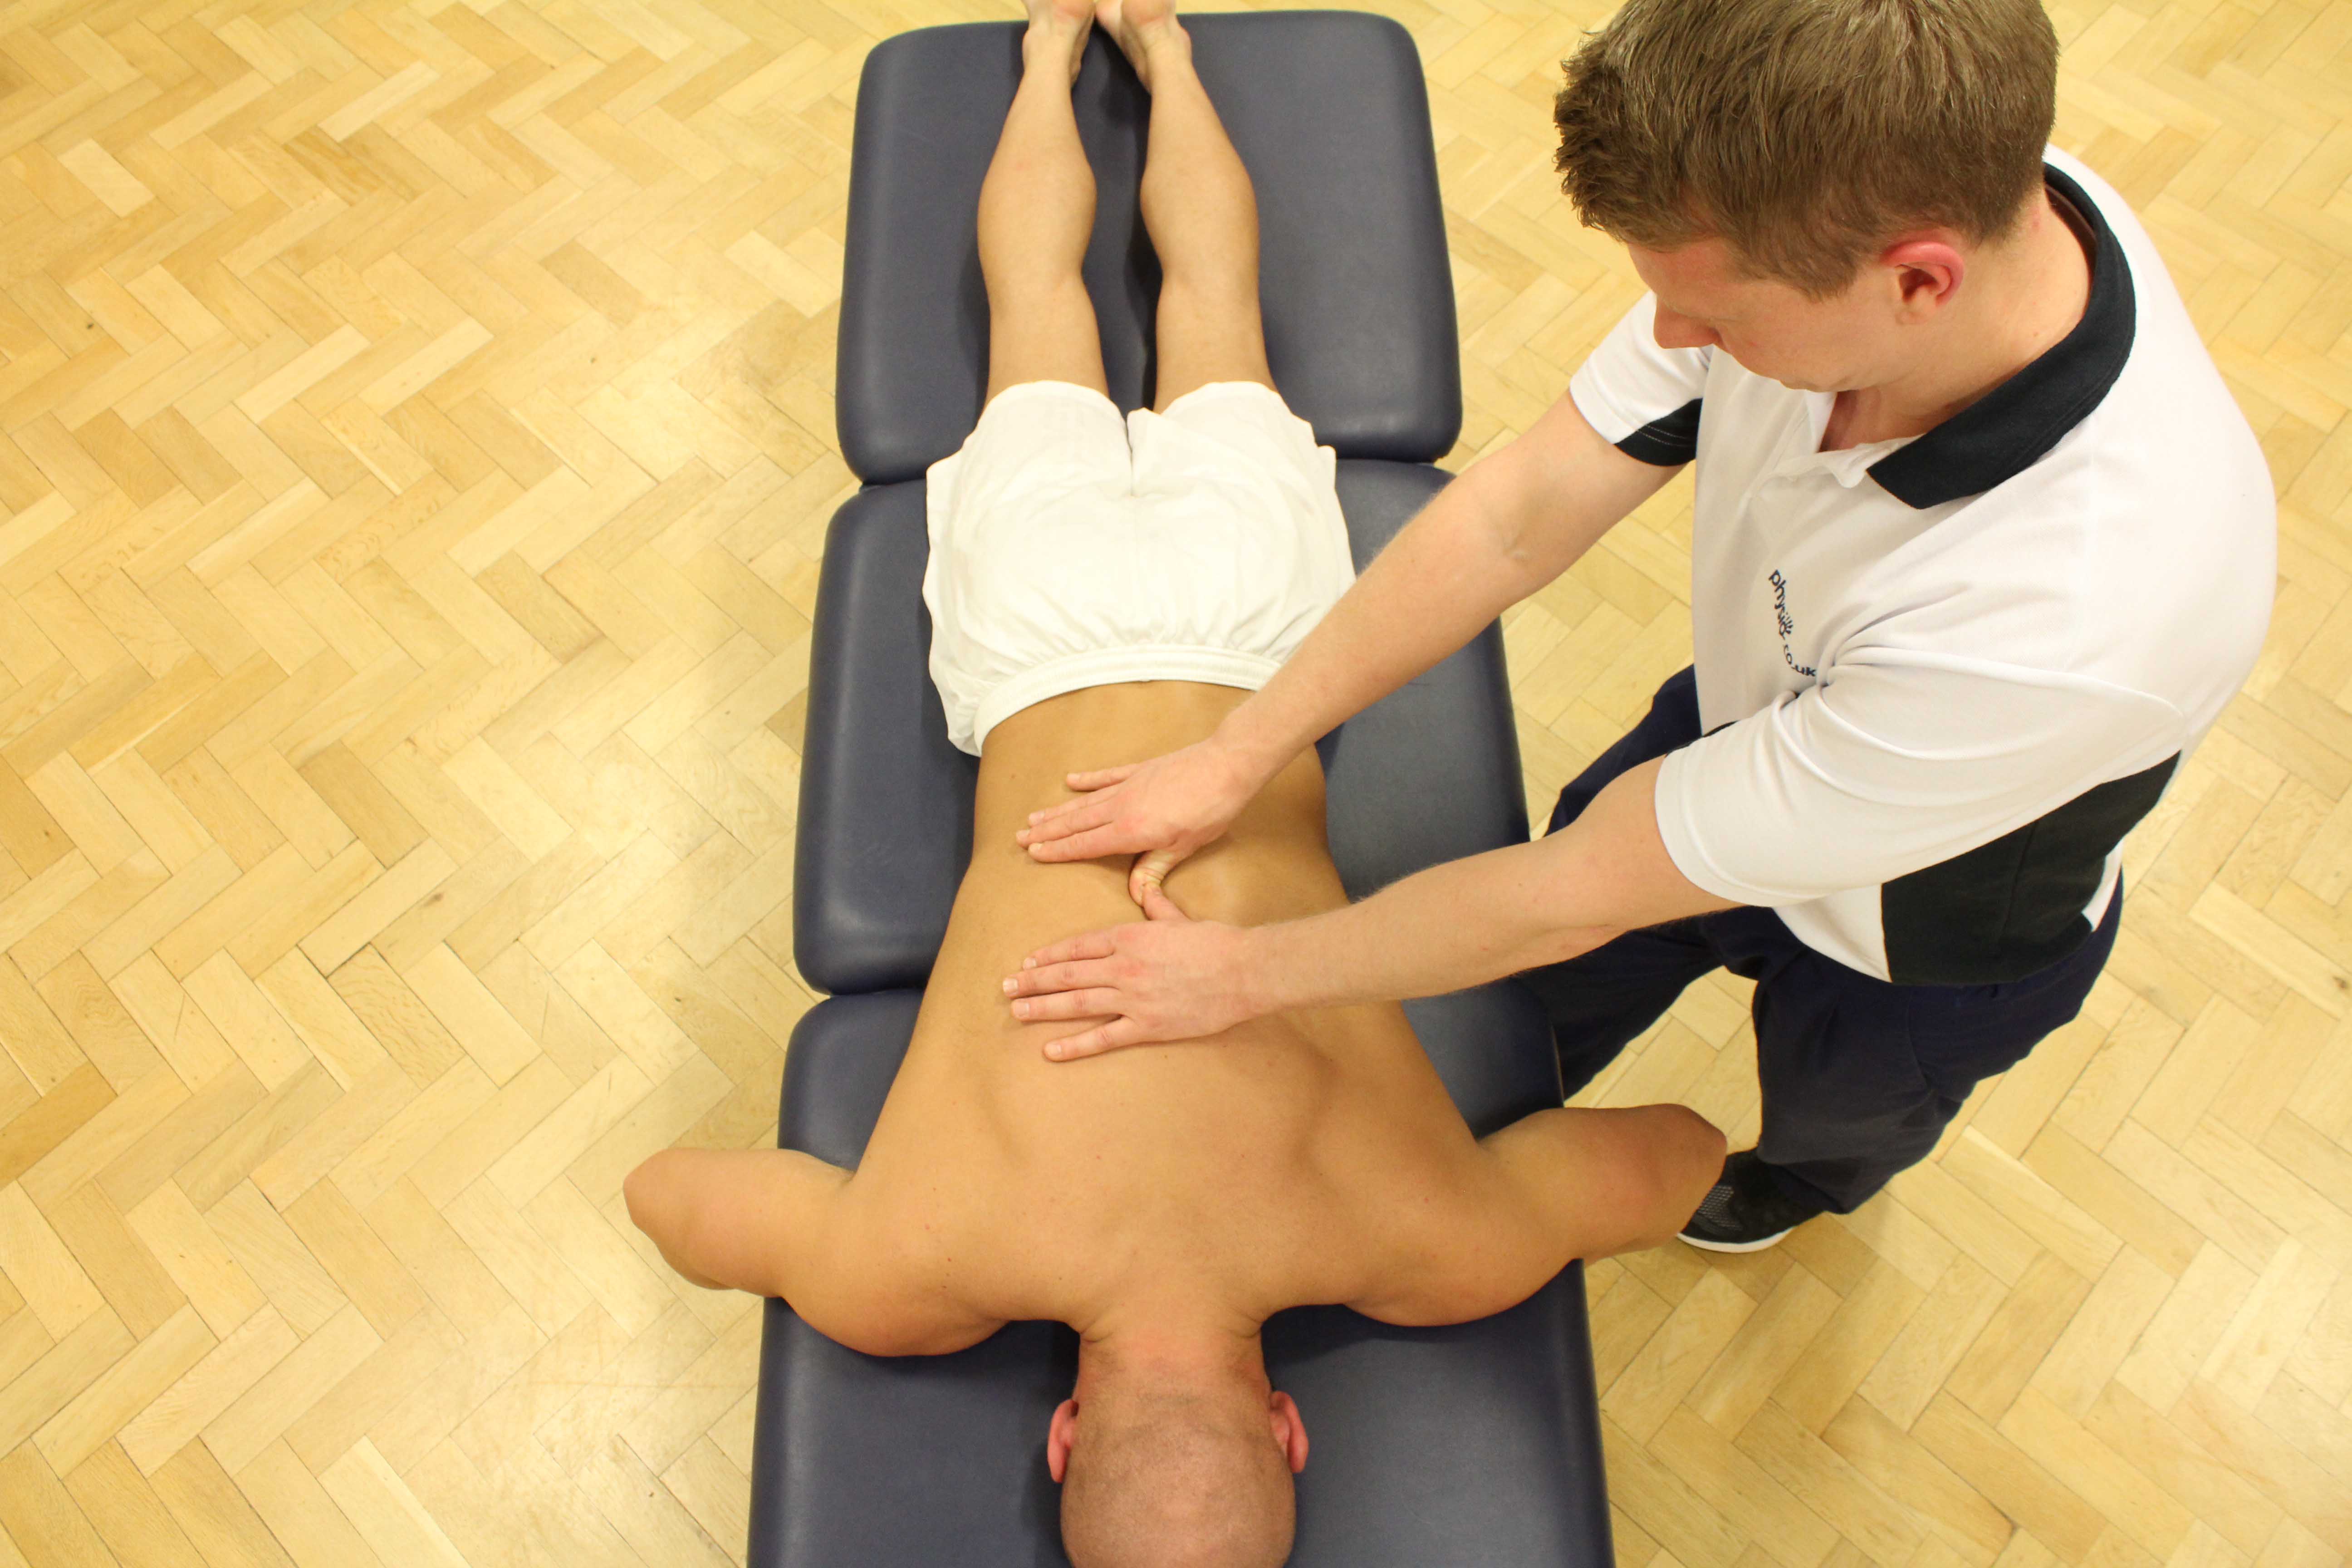 Mobilisations of the vertebrea in the lower back by experienced therapist